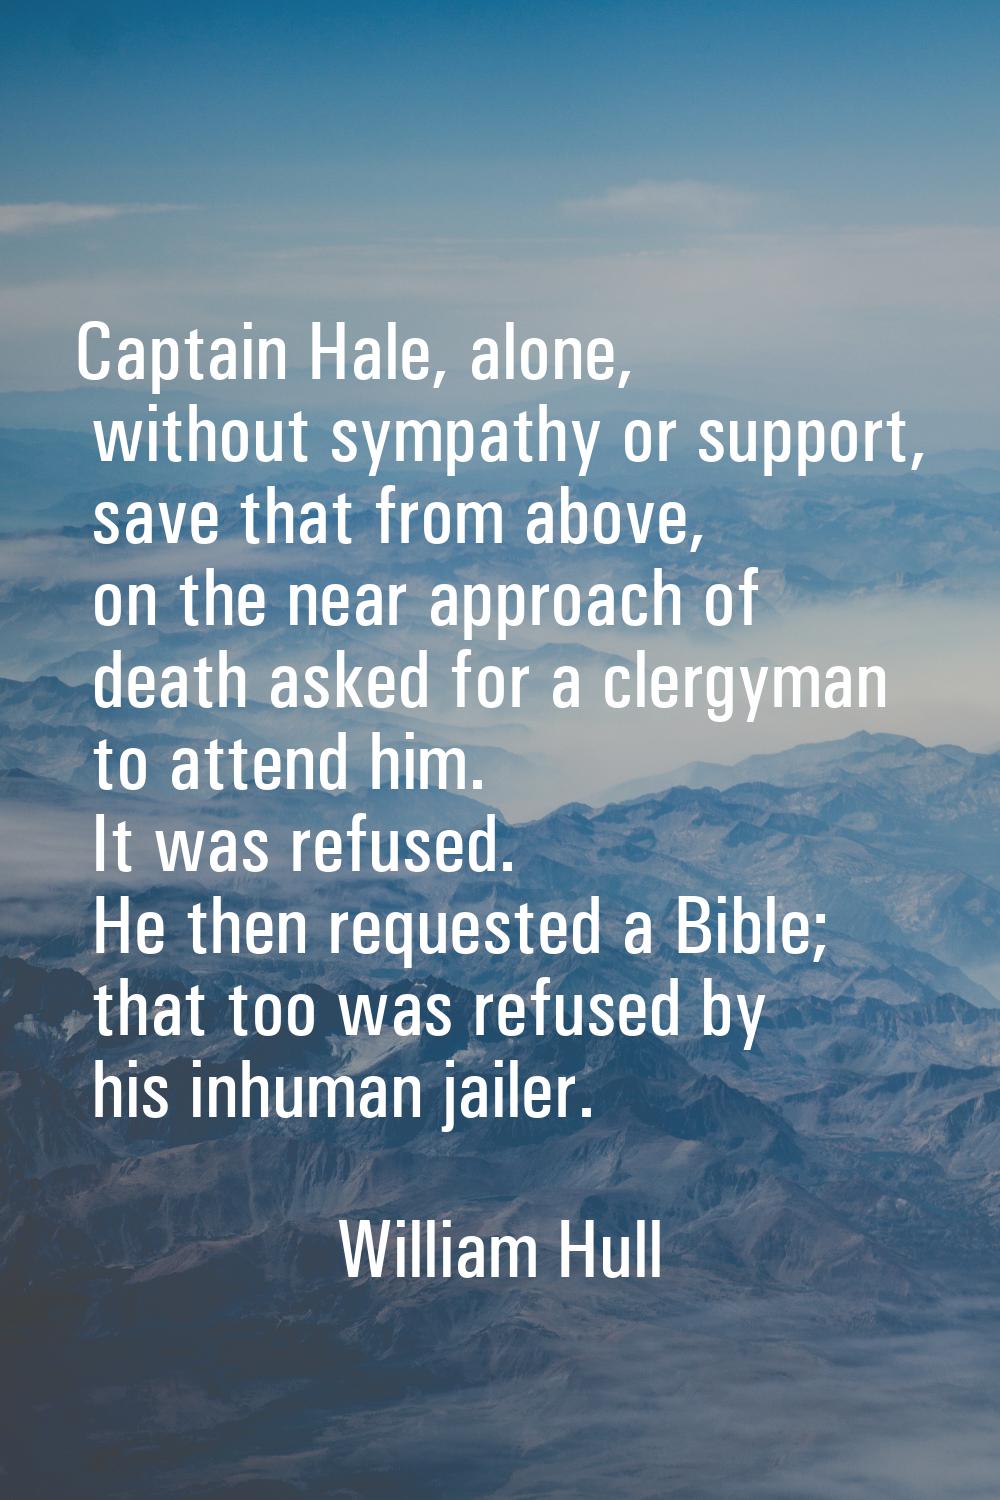 Captain Hale, alone, without sympathy or support, save that from above, on the near approach of dea